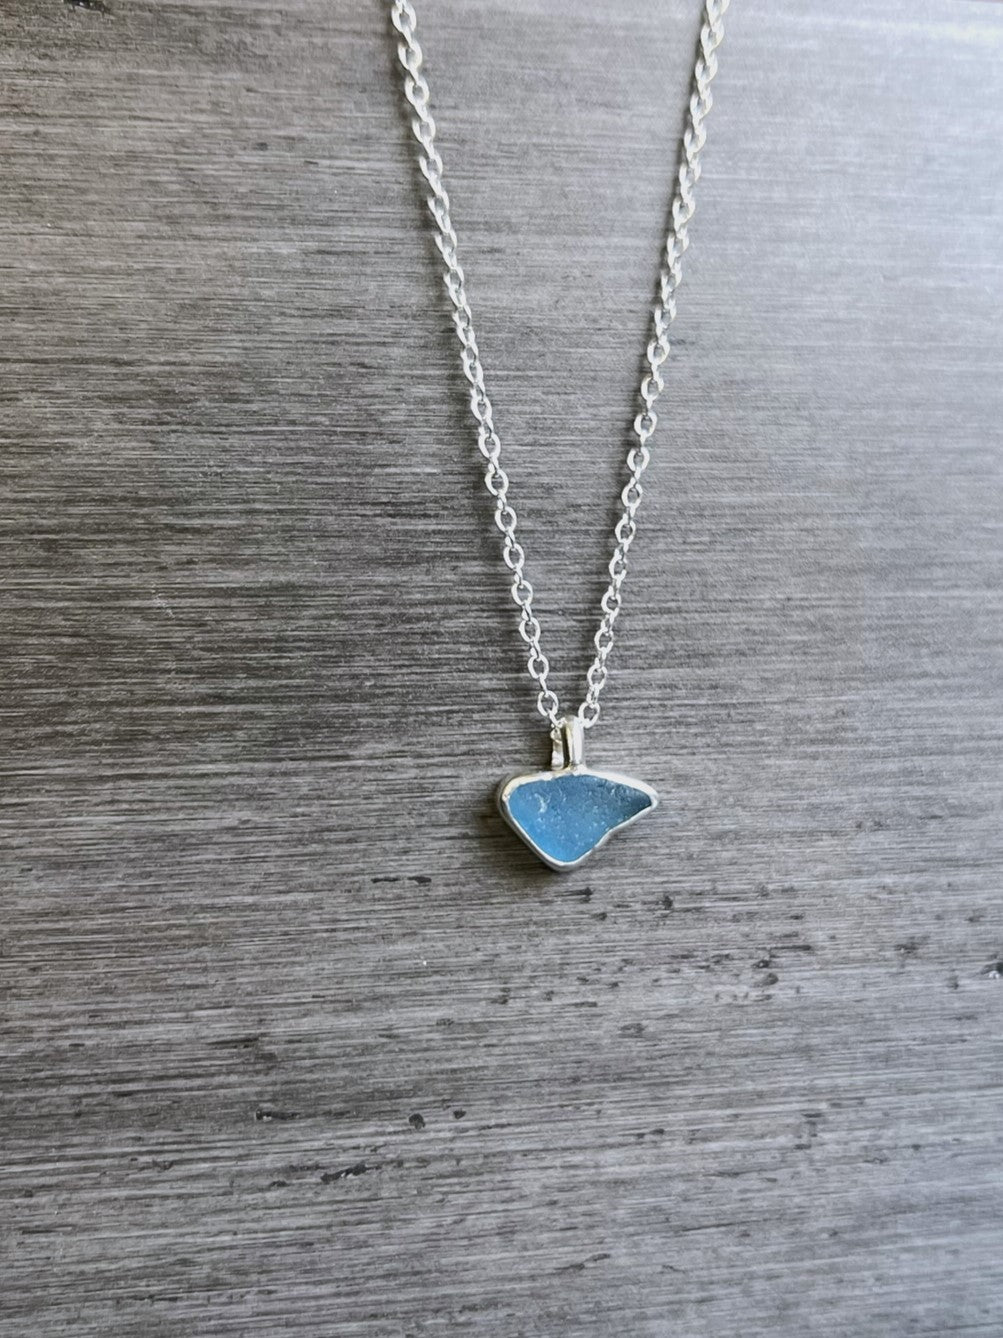 Turquoise Blue Seaglass Sterling Silver Necklace